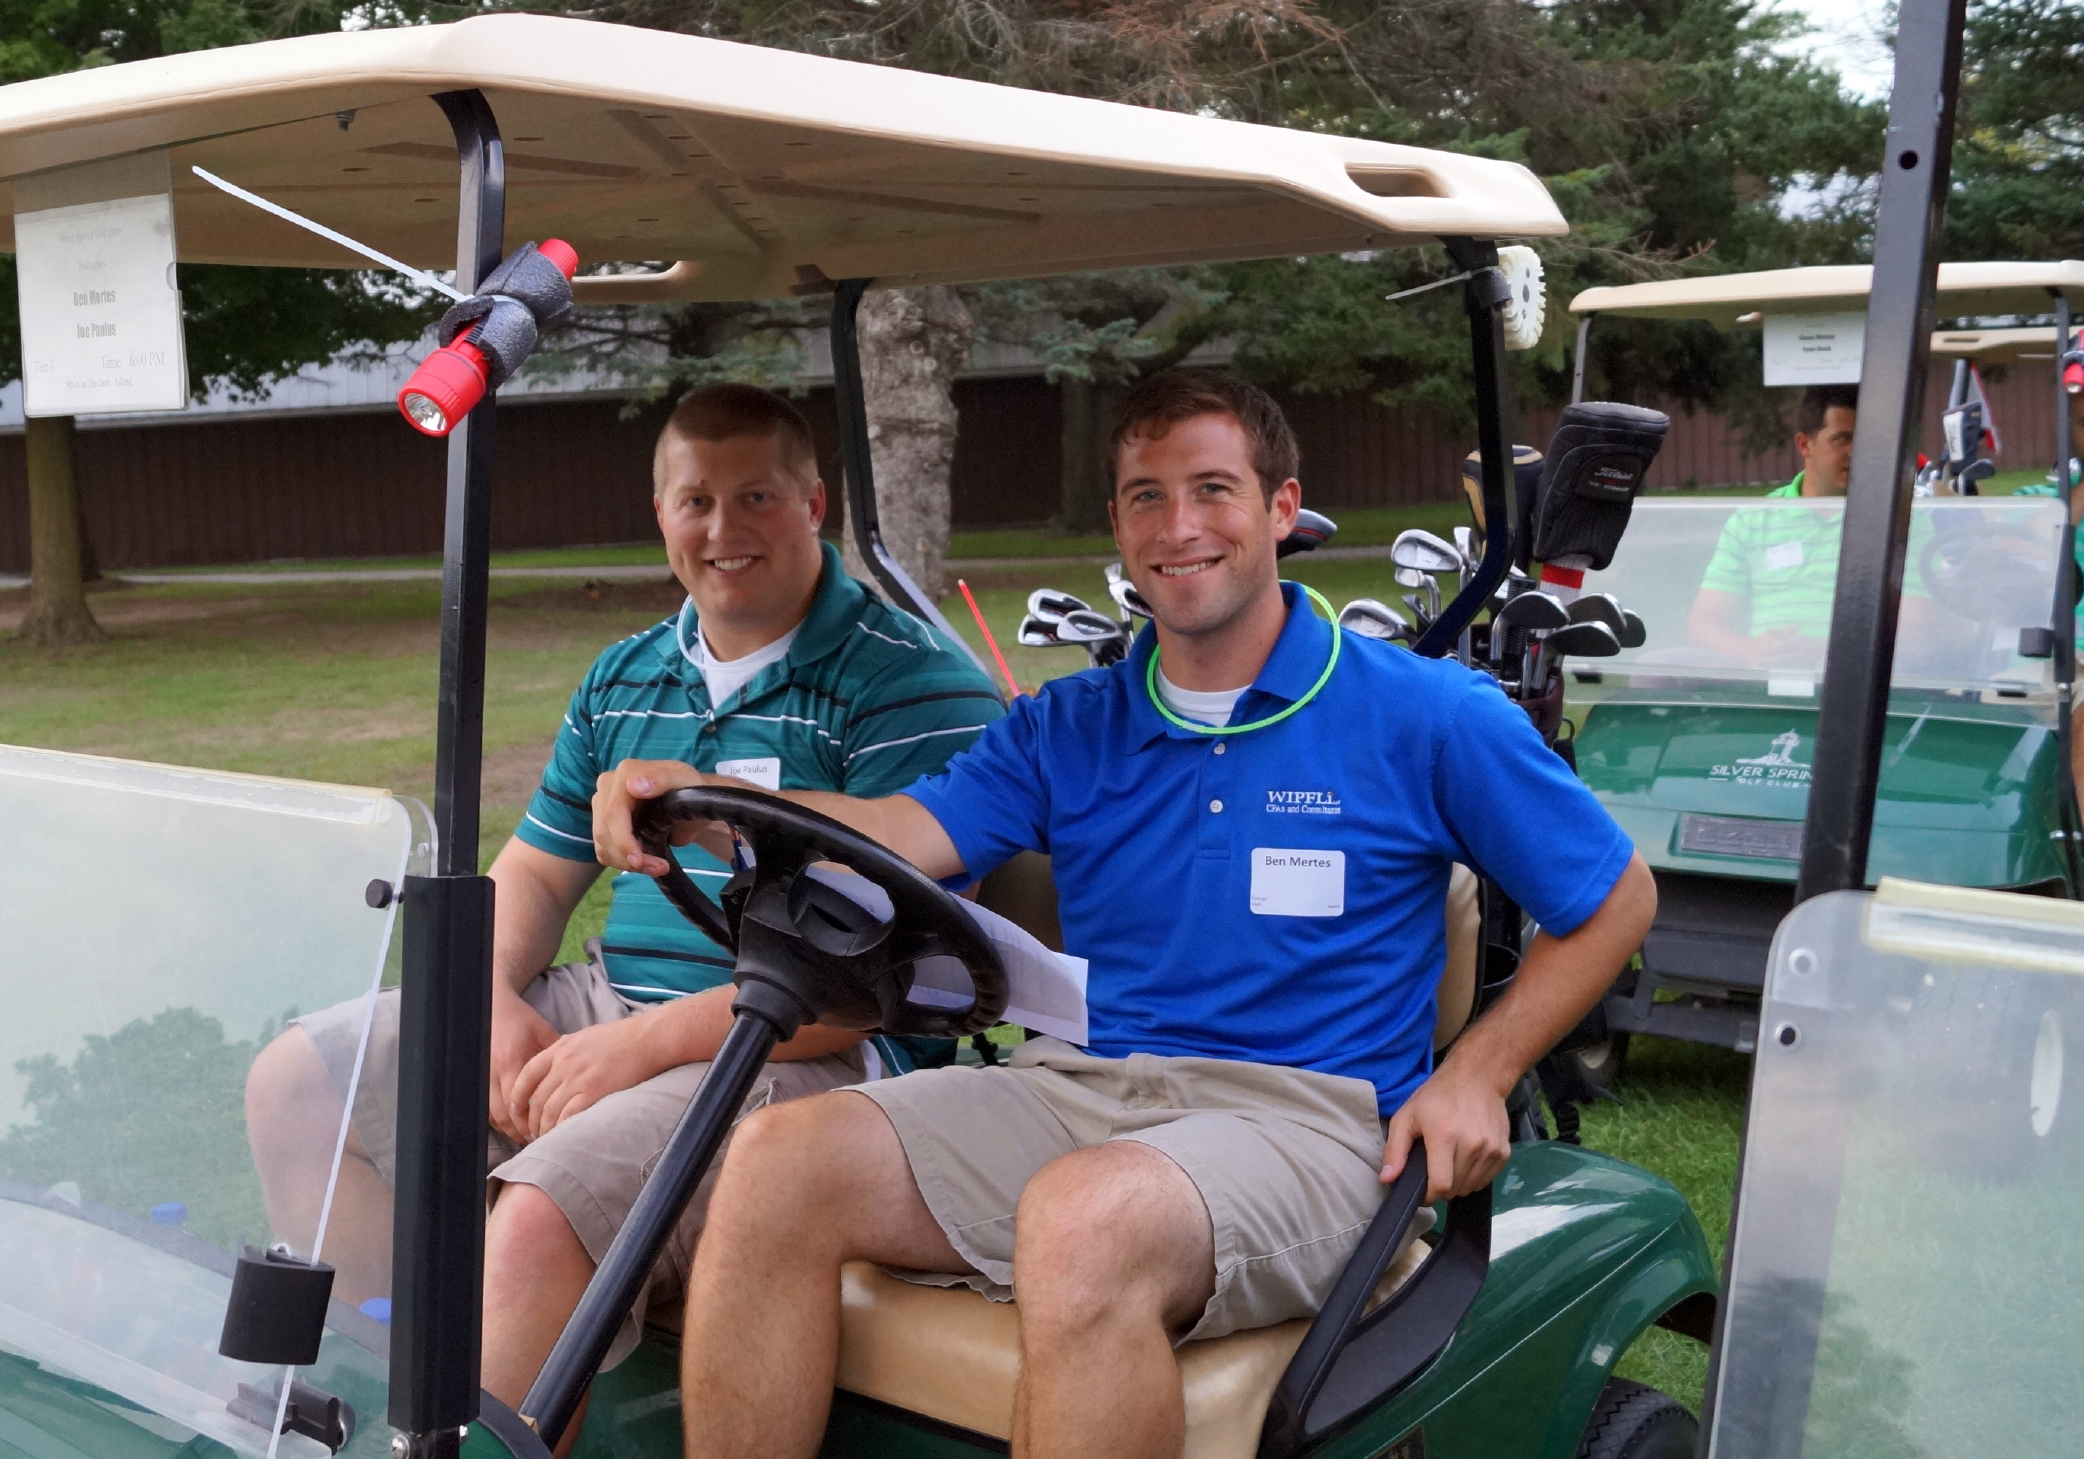 Two young men are very happily sitting in a golf cart.